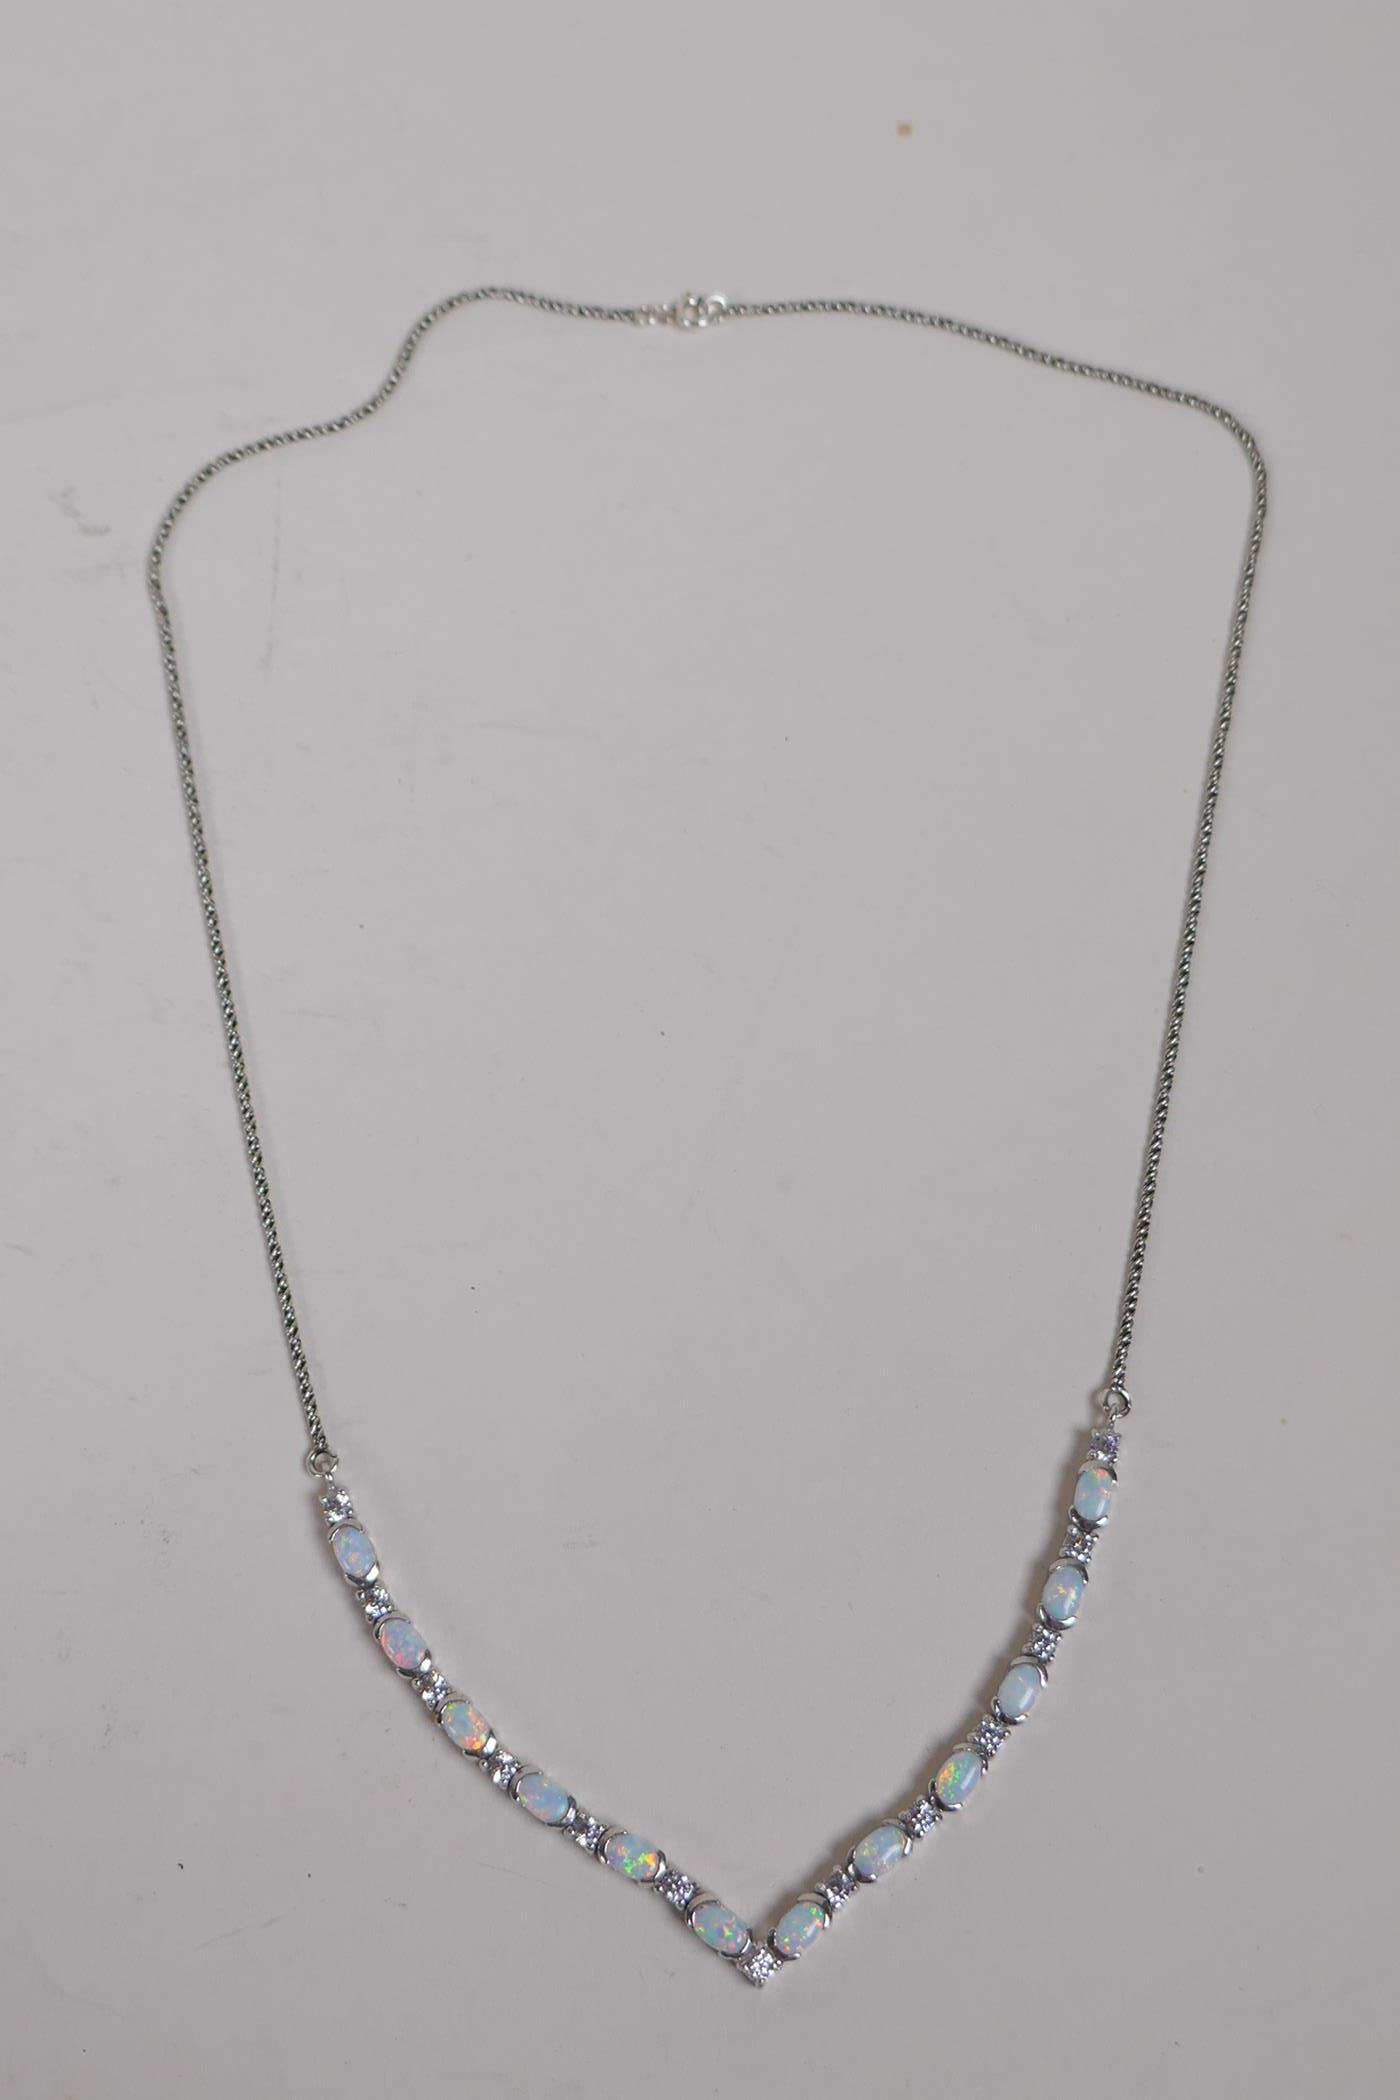 A 925 silver, cubic zirconia and opalite set necklace, 52cm long